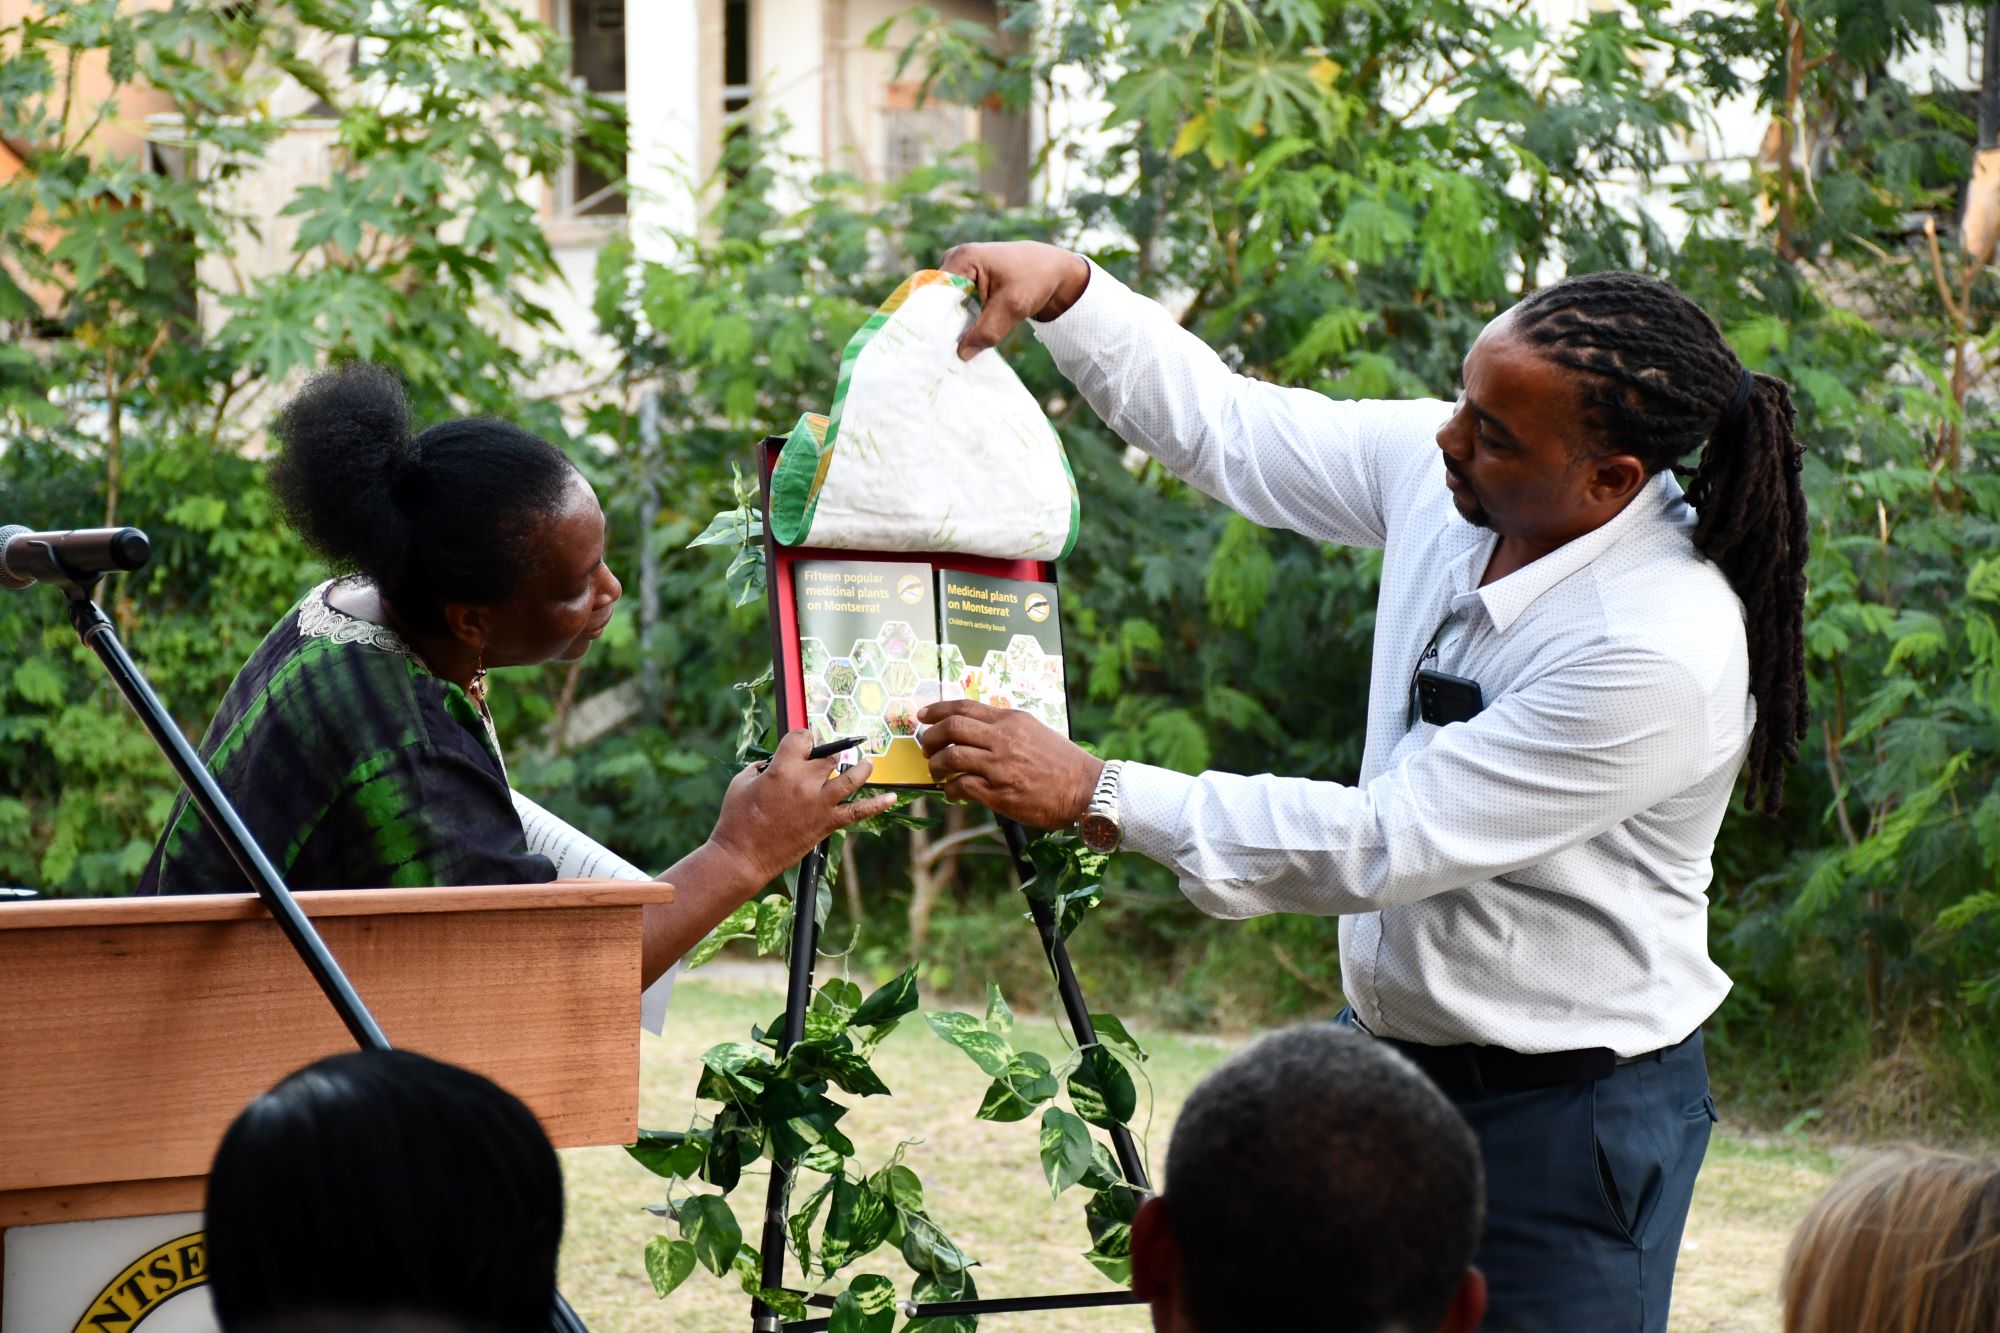 New Books on Medicinal Plants on Montserrat Launched at National Museum